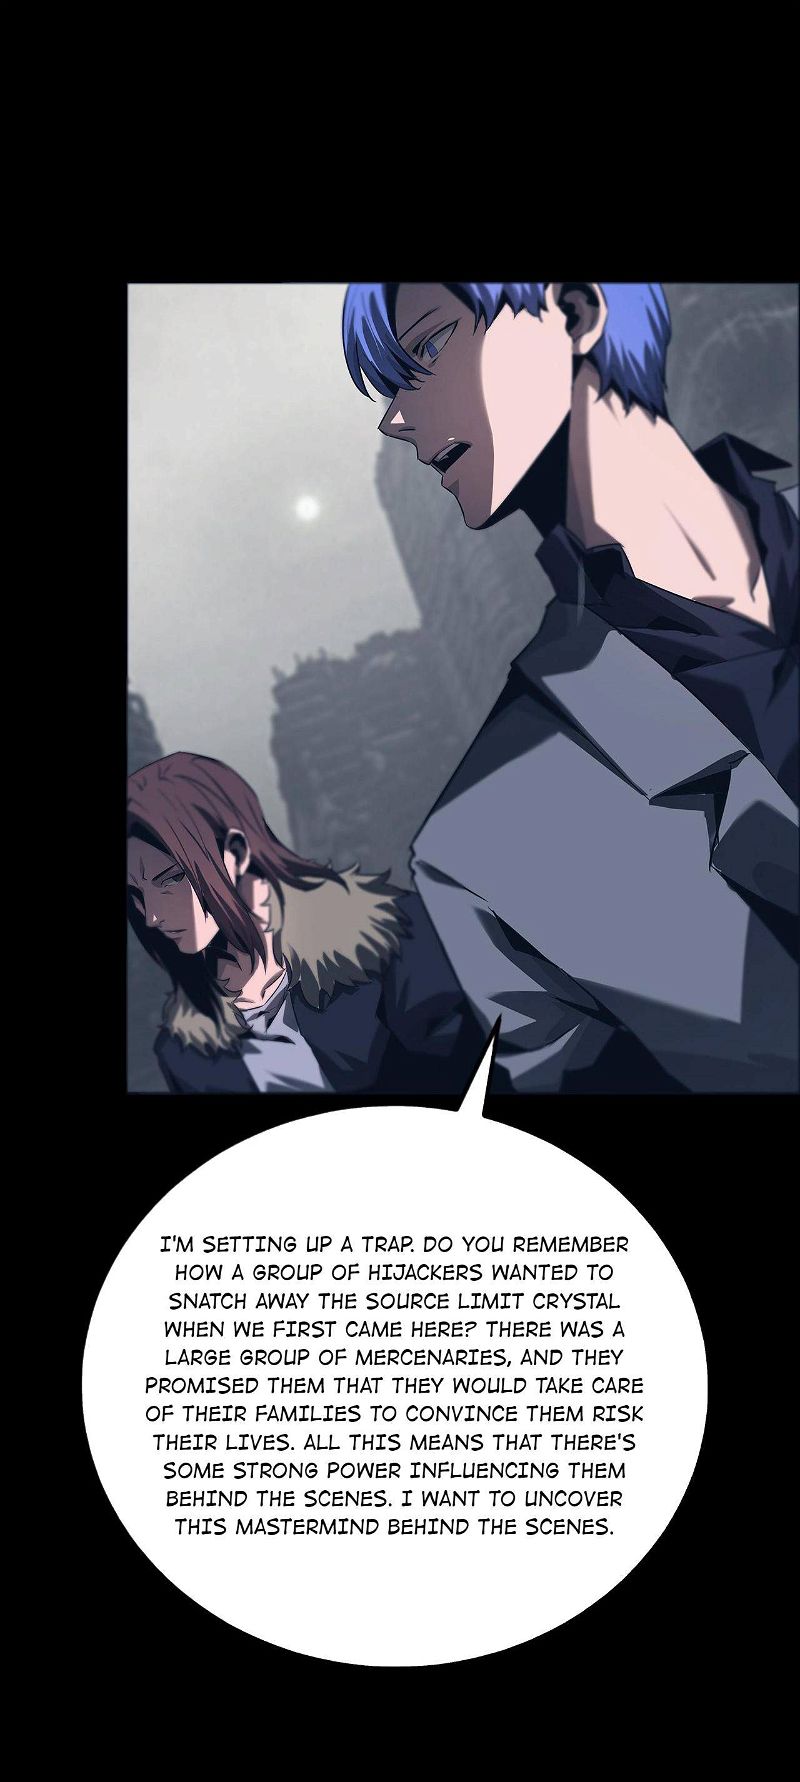 The Blade Of Evolution-Walking Alone In The Dungeon Chapter 68 page 8